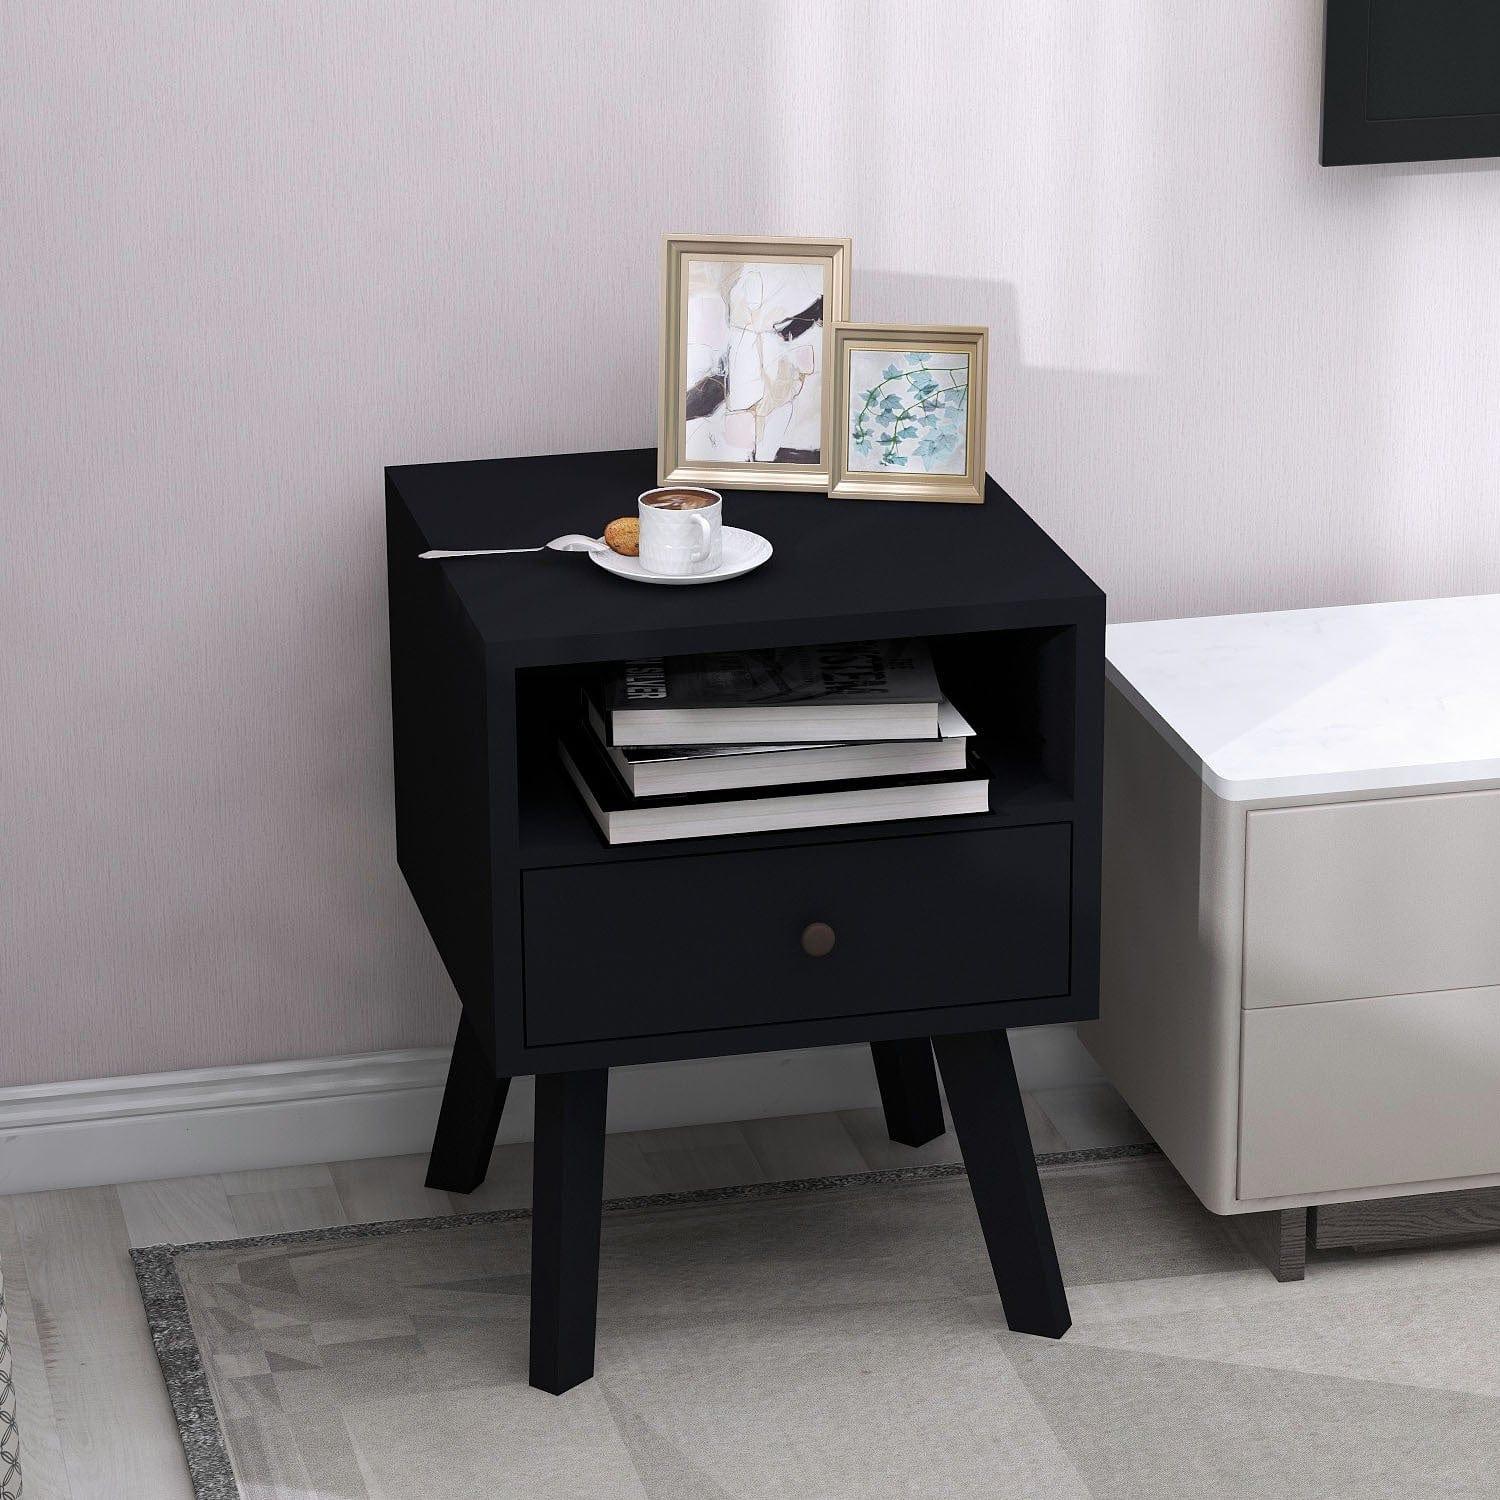 Shop Mid-Century Modern Bedside Table, 1 Drawer with Open Shelves, black Mademoiselle Home Decor